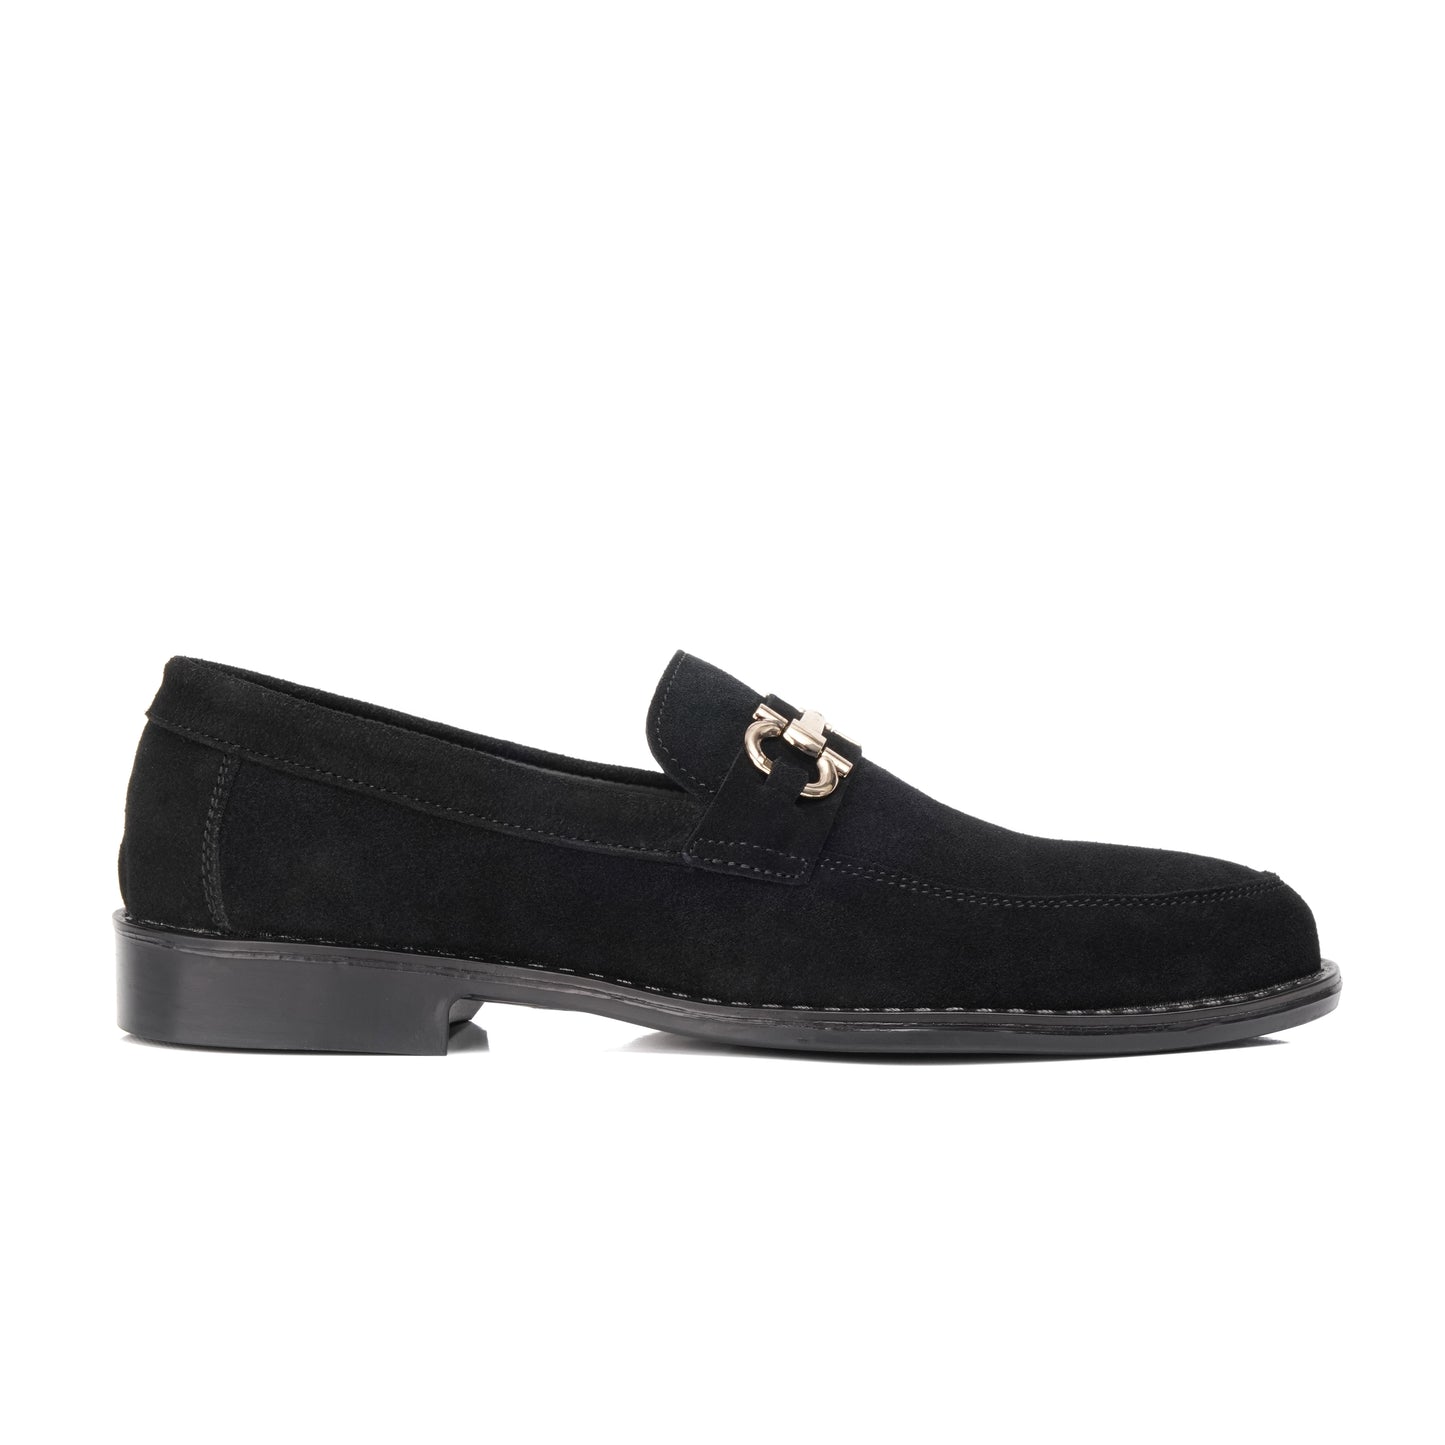 ST-05-Black Suede Cow Leather Horse bit Formal Loafer Style In Rubber sole